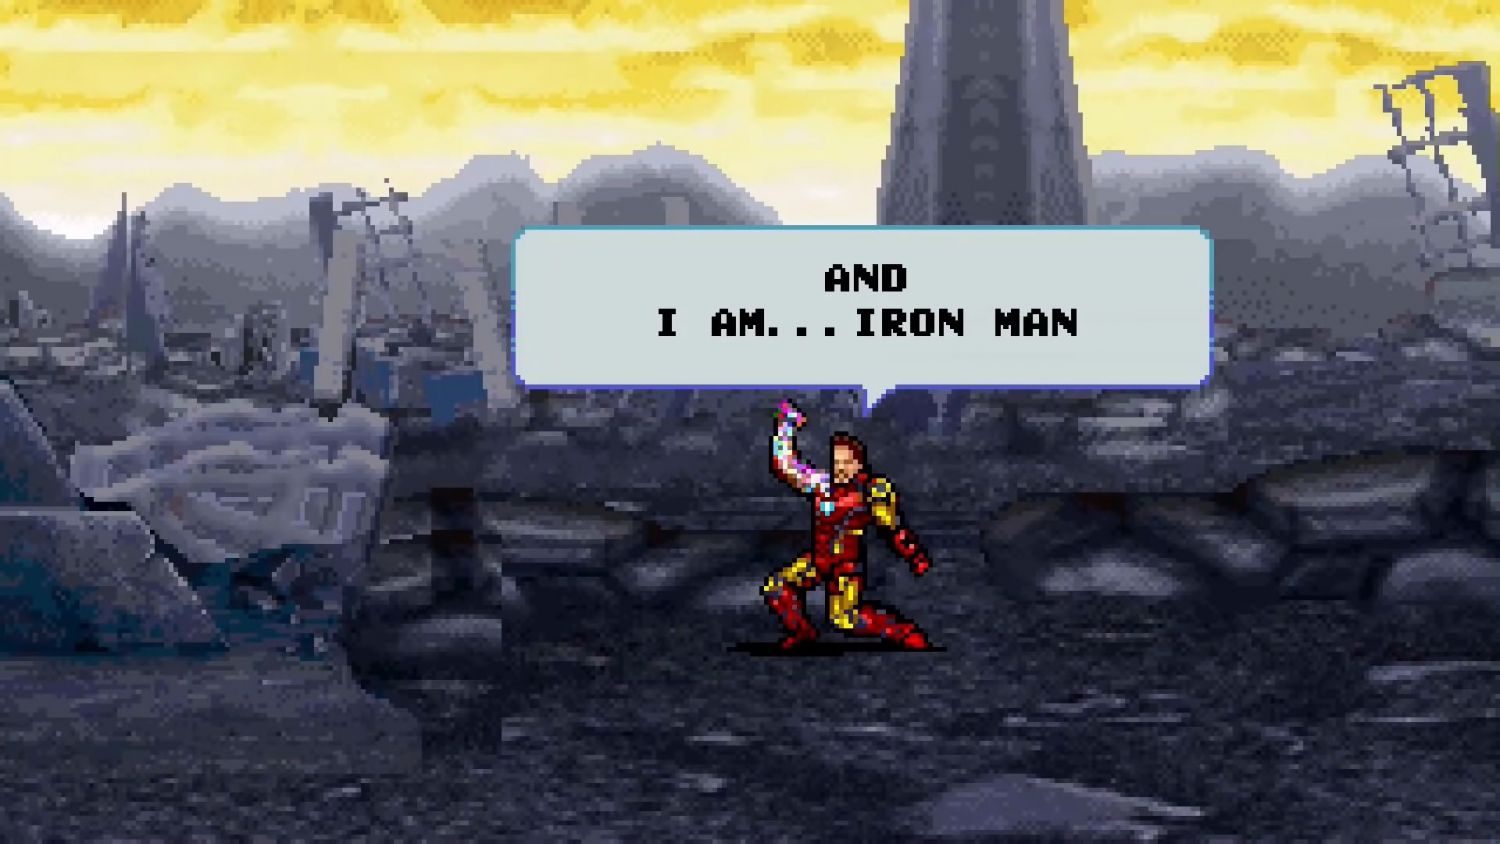 Check out this 16-bit version of Avengers: Endgame's final battle scene